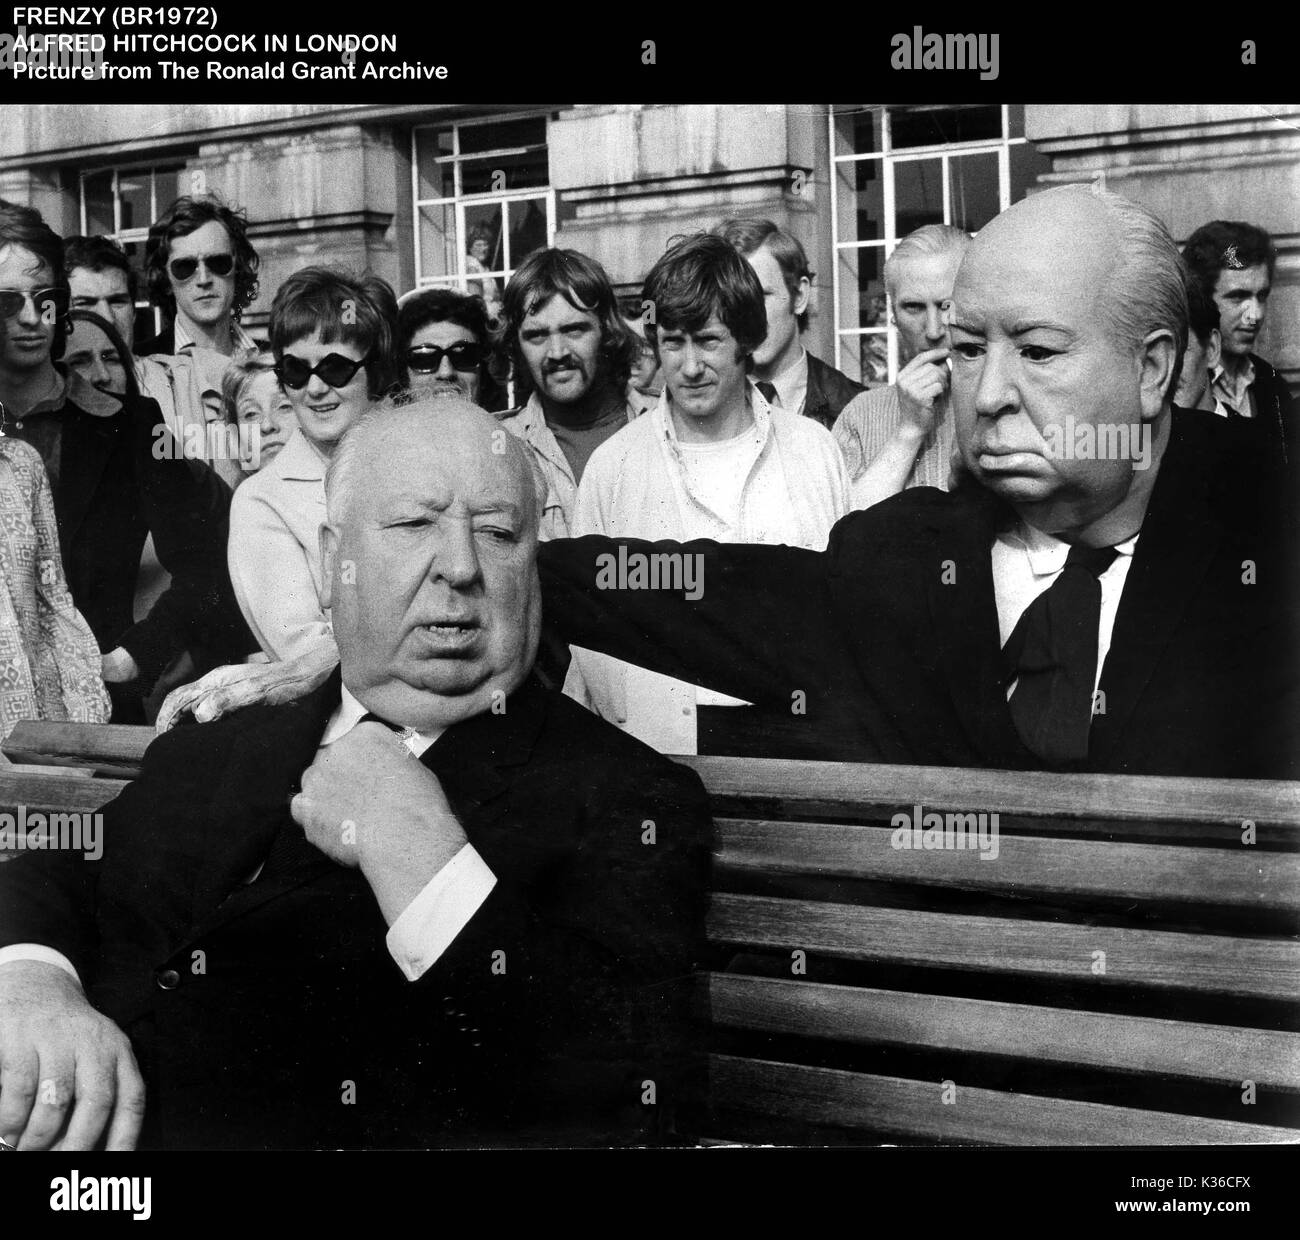 FRENZY BR 1972] ALFRED HITCHCOCK Stock Photo